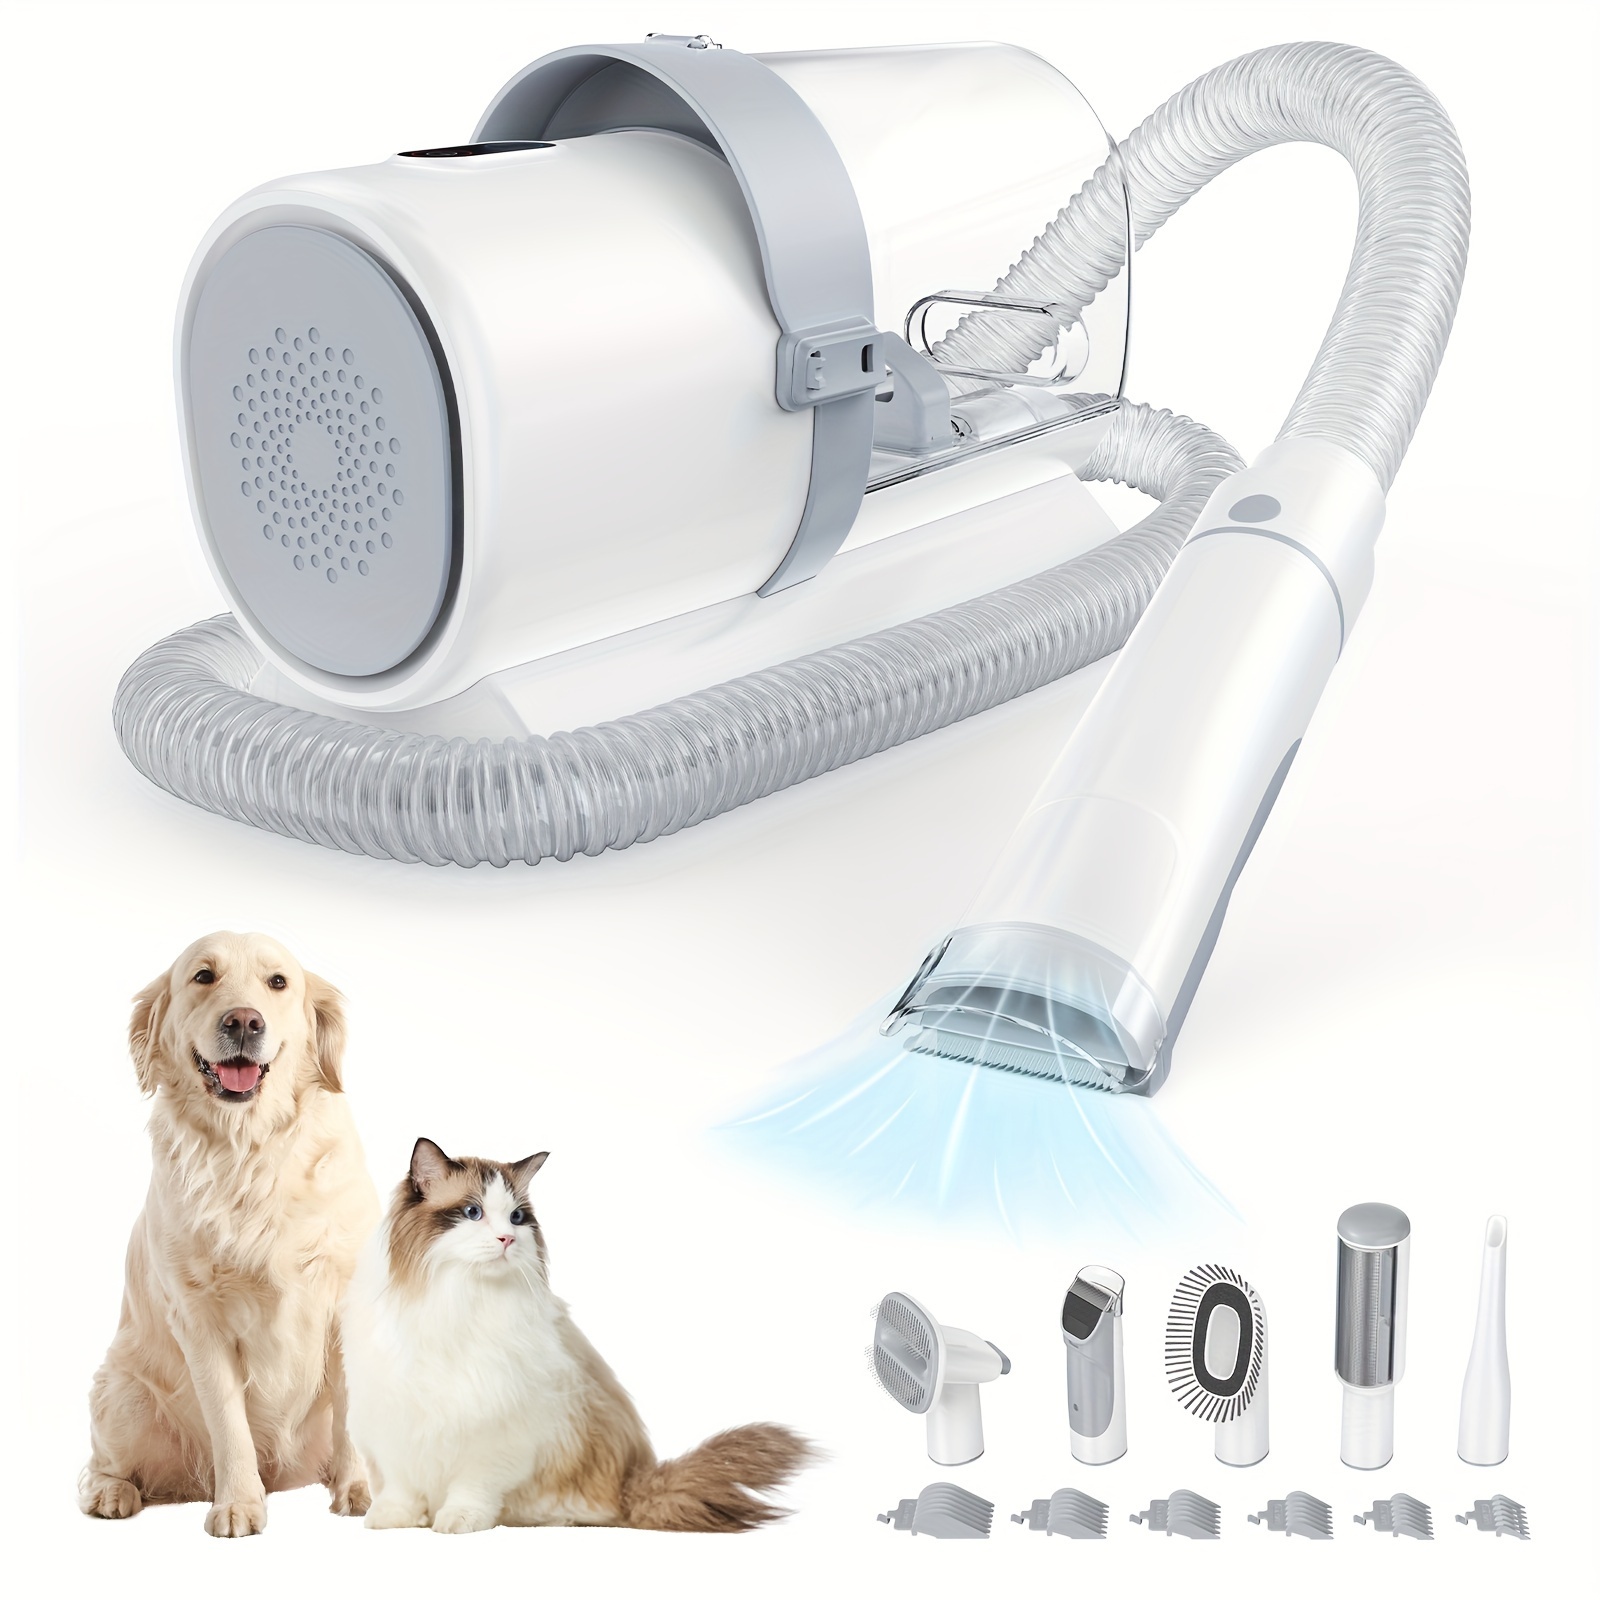 

Dog Grooming Vacuum Kit: 16000pa Powerful Dog Vacuum Brush For Shedding Grooming 99% Pet Hair Suction With 5 Pet Grooming Tools, 2.5l Large Dust Cup & Low Noise Grooming Clippers Tools For Dogs Cats